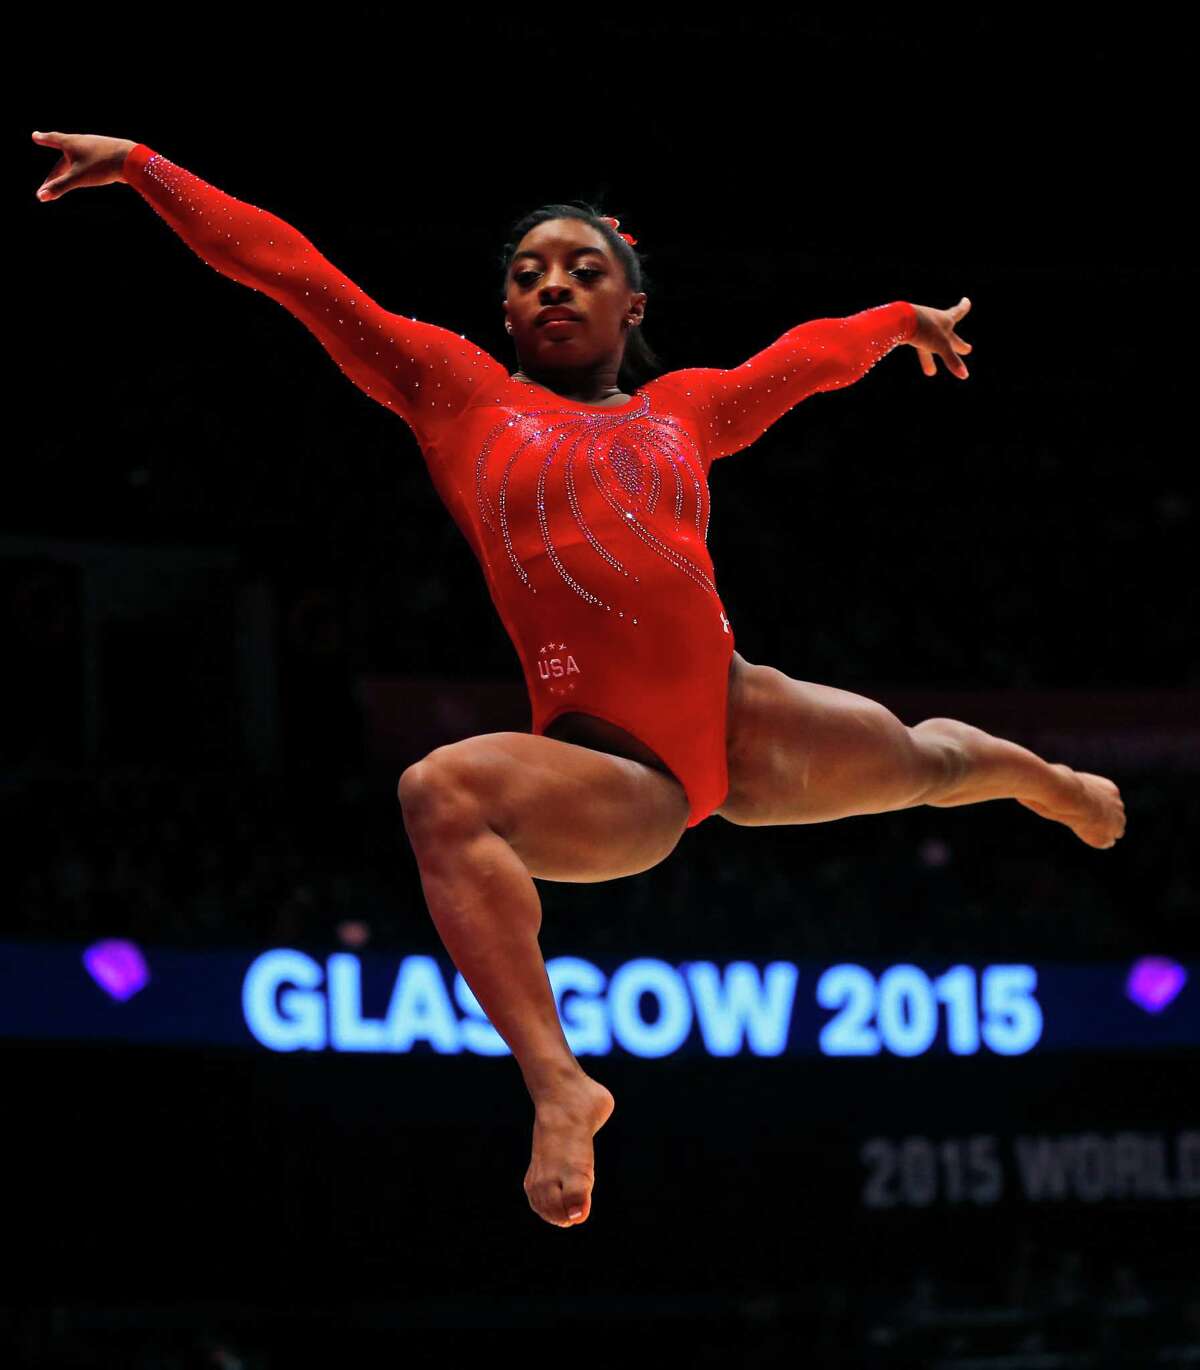 team final competition at the World Artistic Gymnastics championships at th...